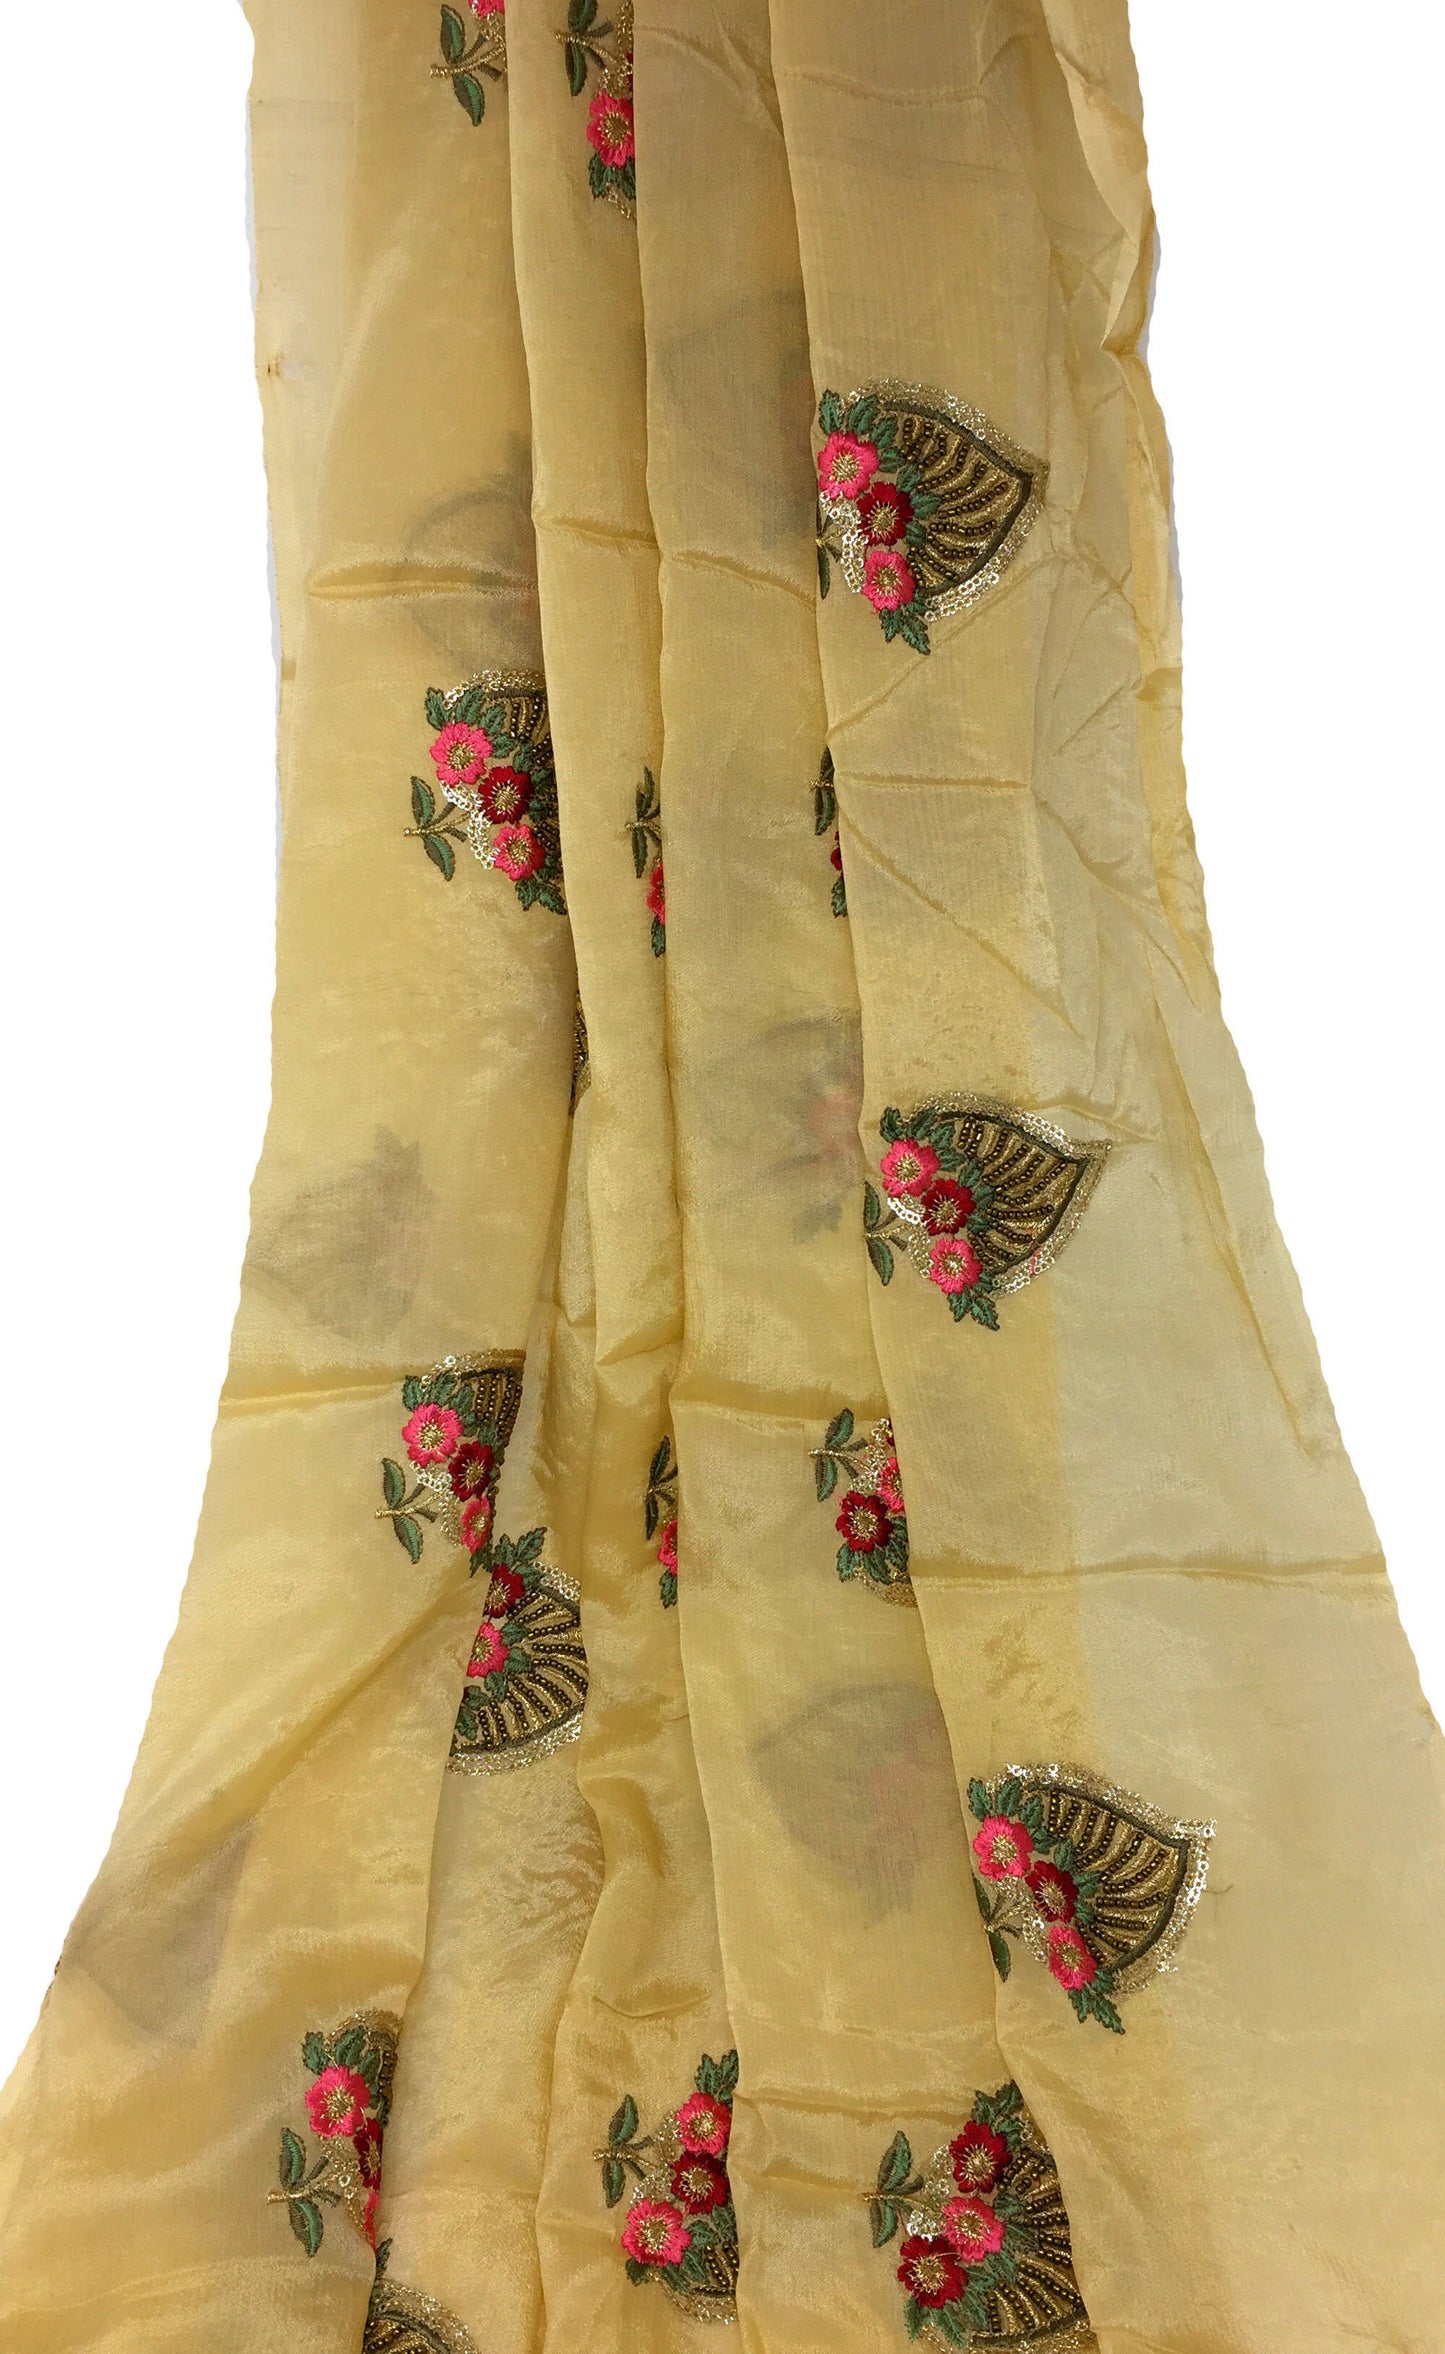 Chinon Chiffon Fabric, Silk Look, Floral Beaded Embroidery in Beige